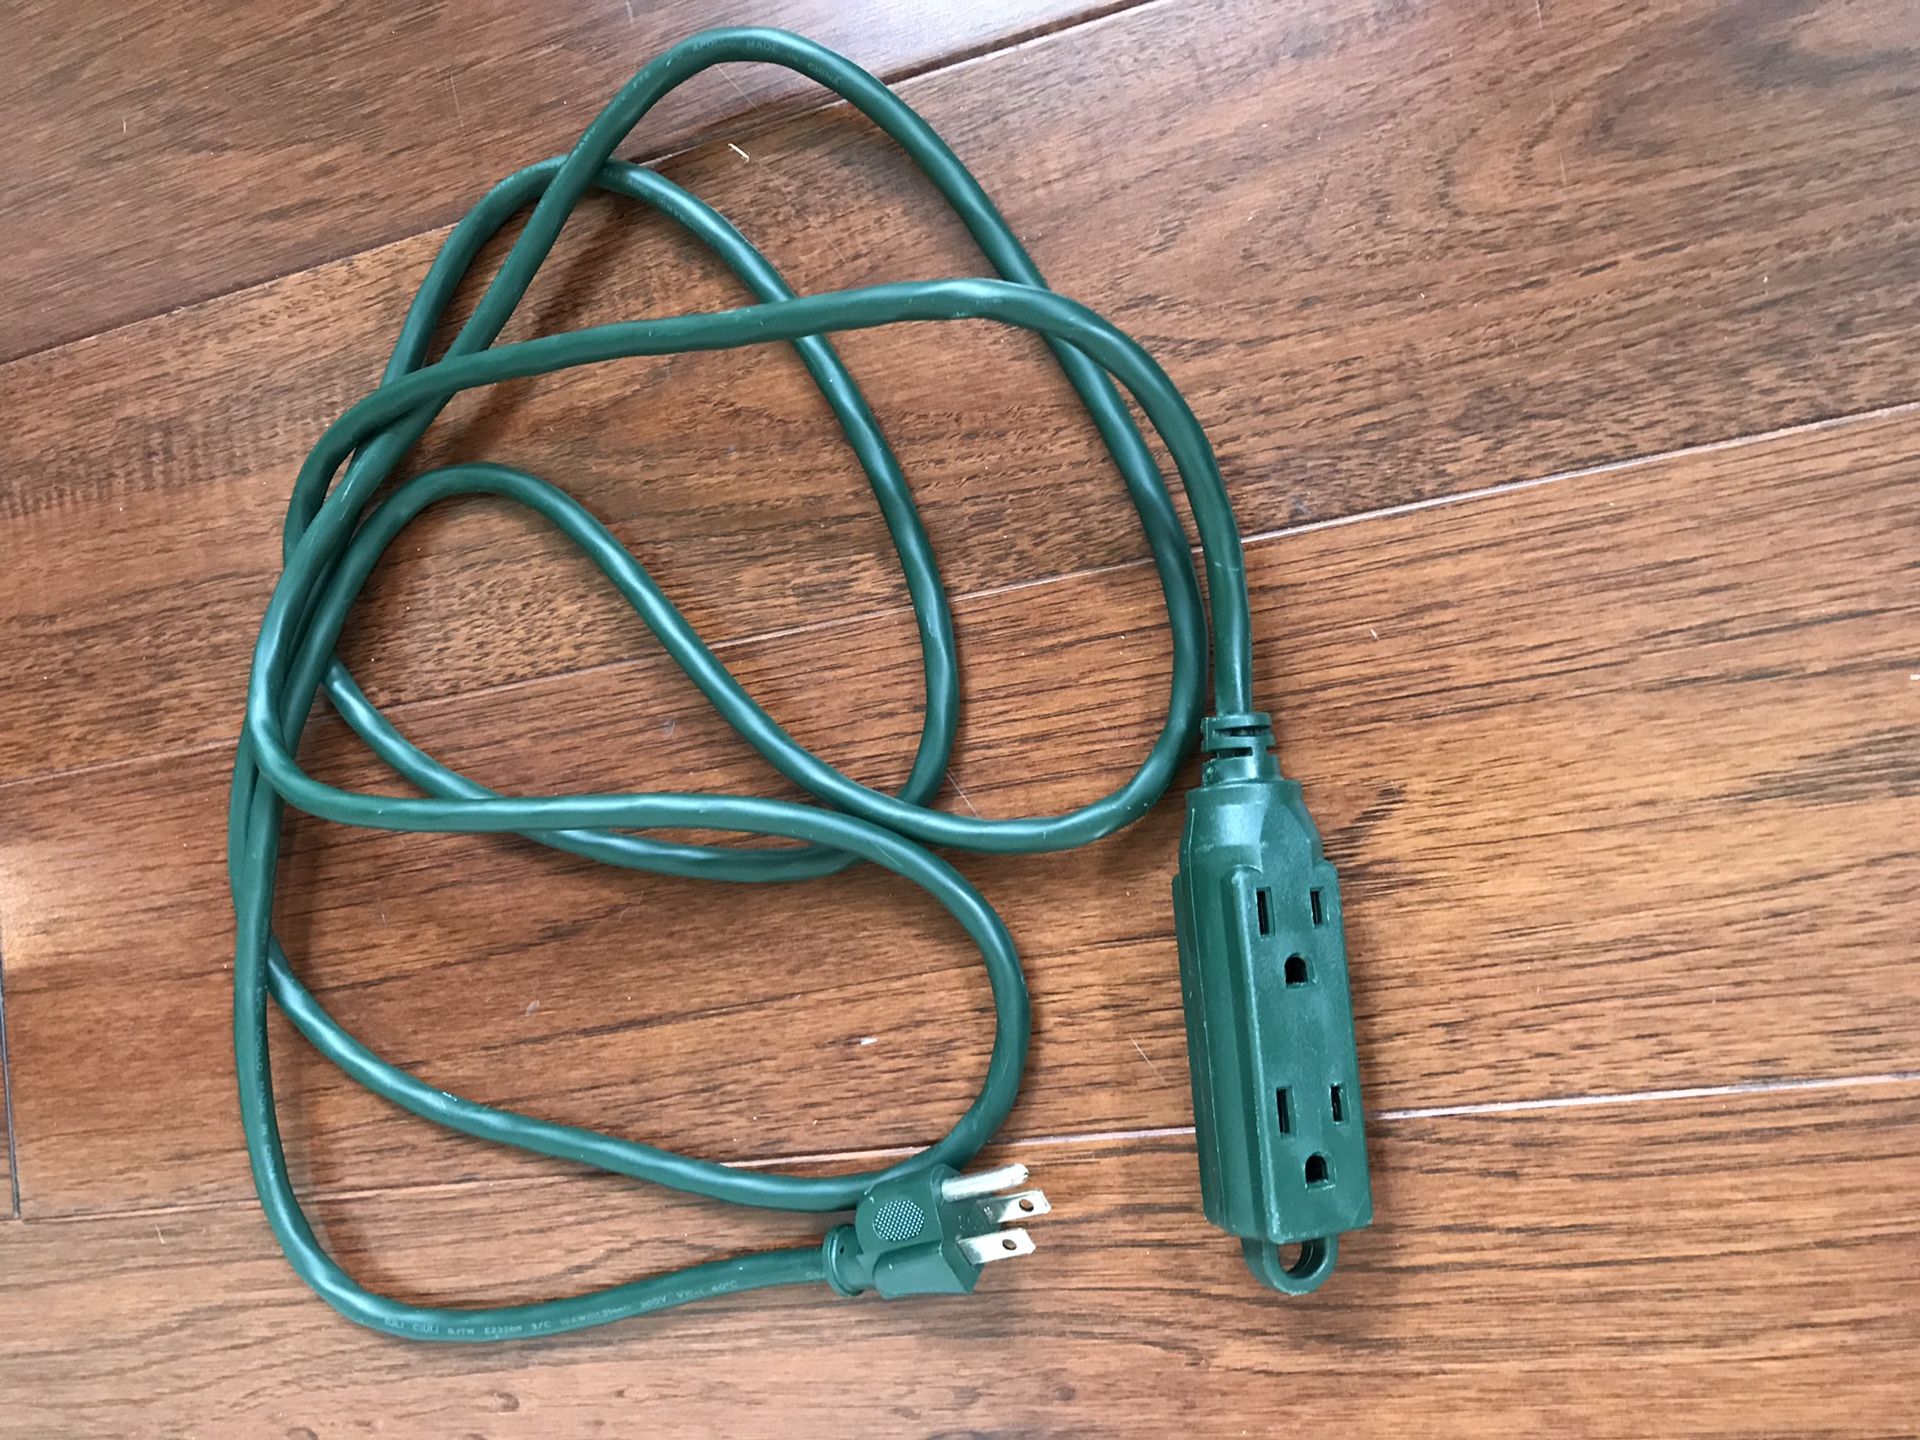 Outside/inside extension cord 100 inch long